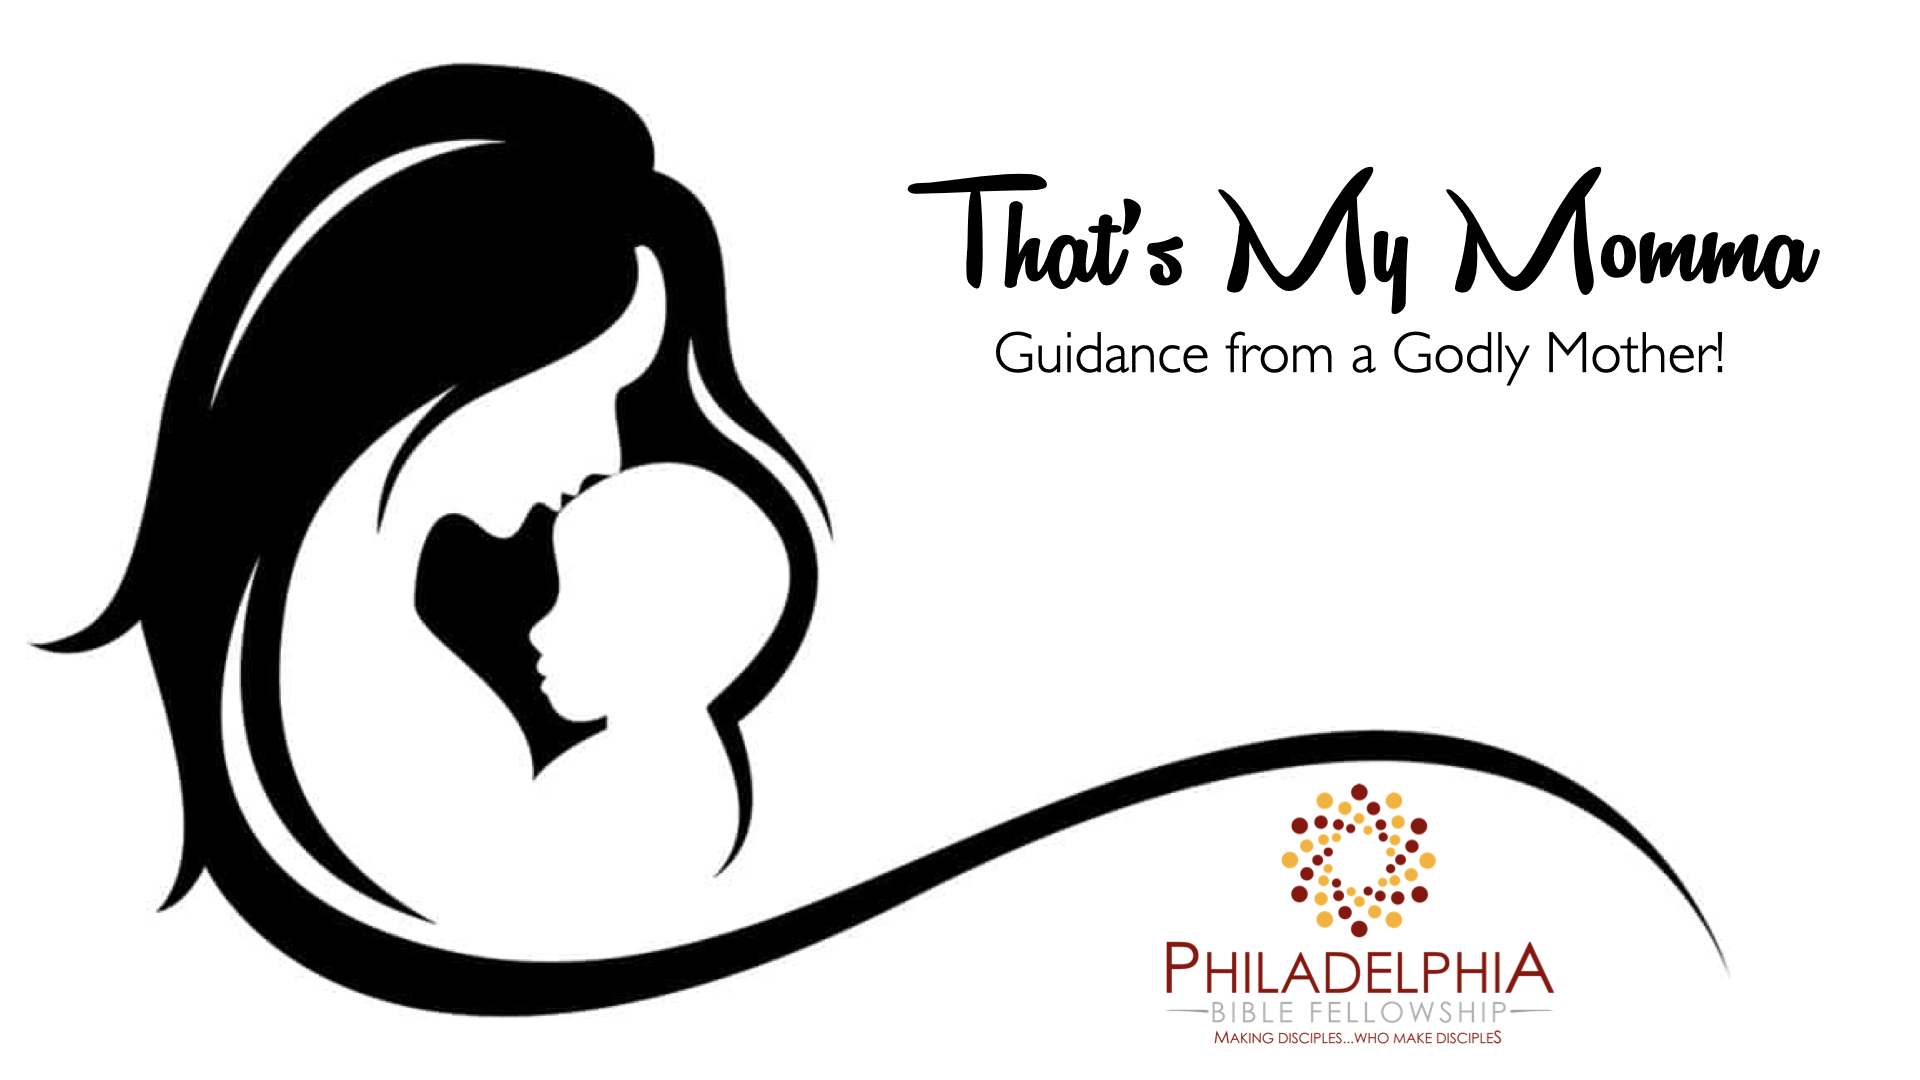 That's My Momma: Guidance from a Godly Mother!